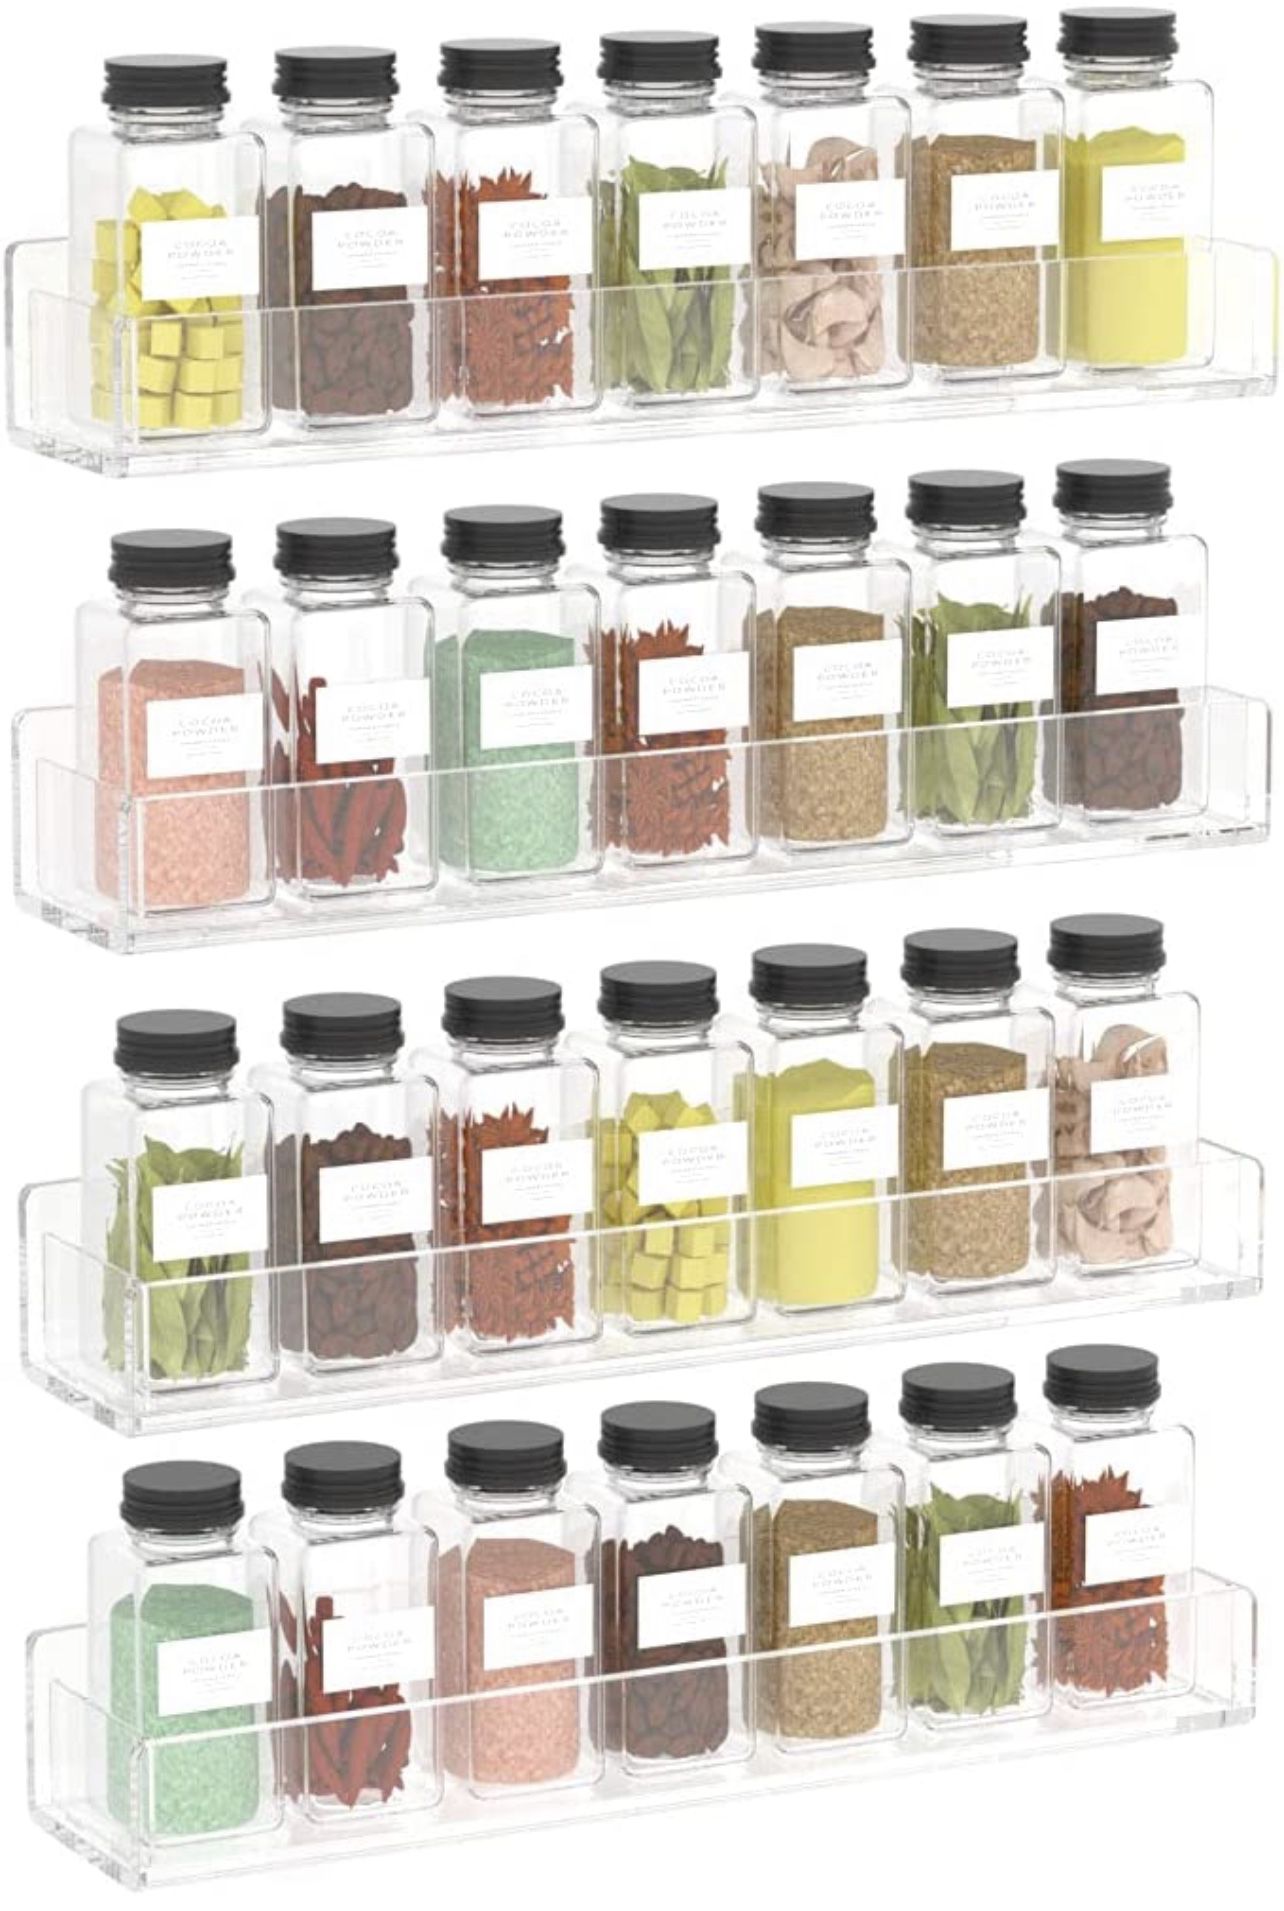 Wall Mounted Spice Rack Organizer,Clear Acrylic Spice Shelf Storage Holder,Hanging Seasoning Rack Organizer for Wall Kitchen 4 Pack